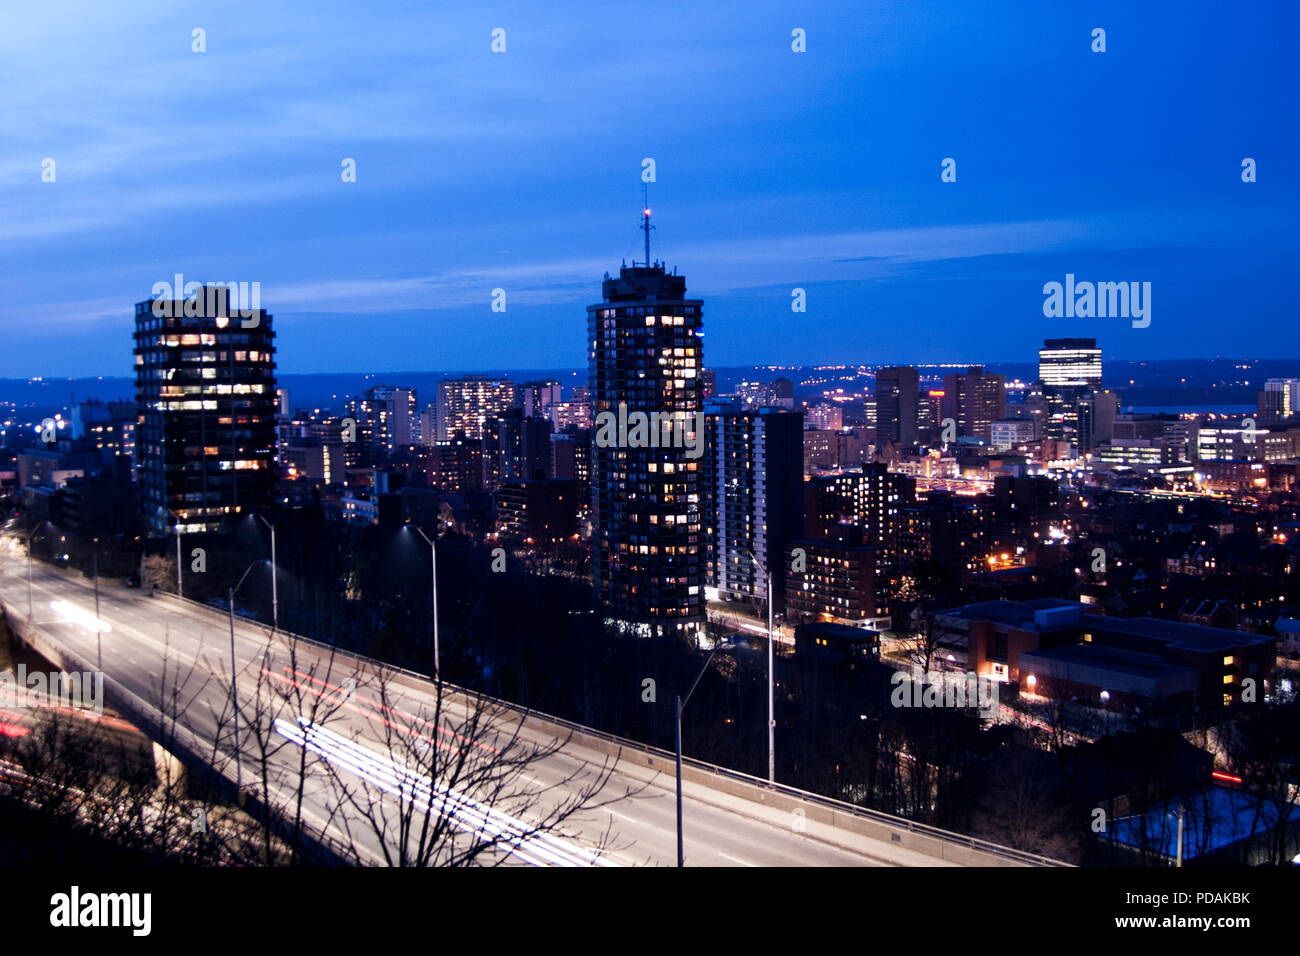 City buildings and homes at night. Night time city panorama. Stock Photo